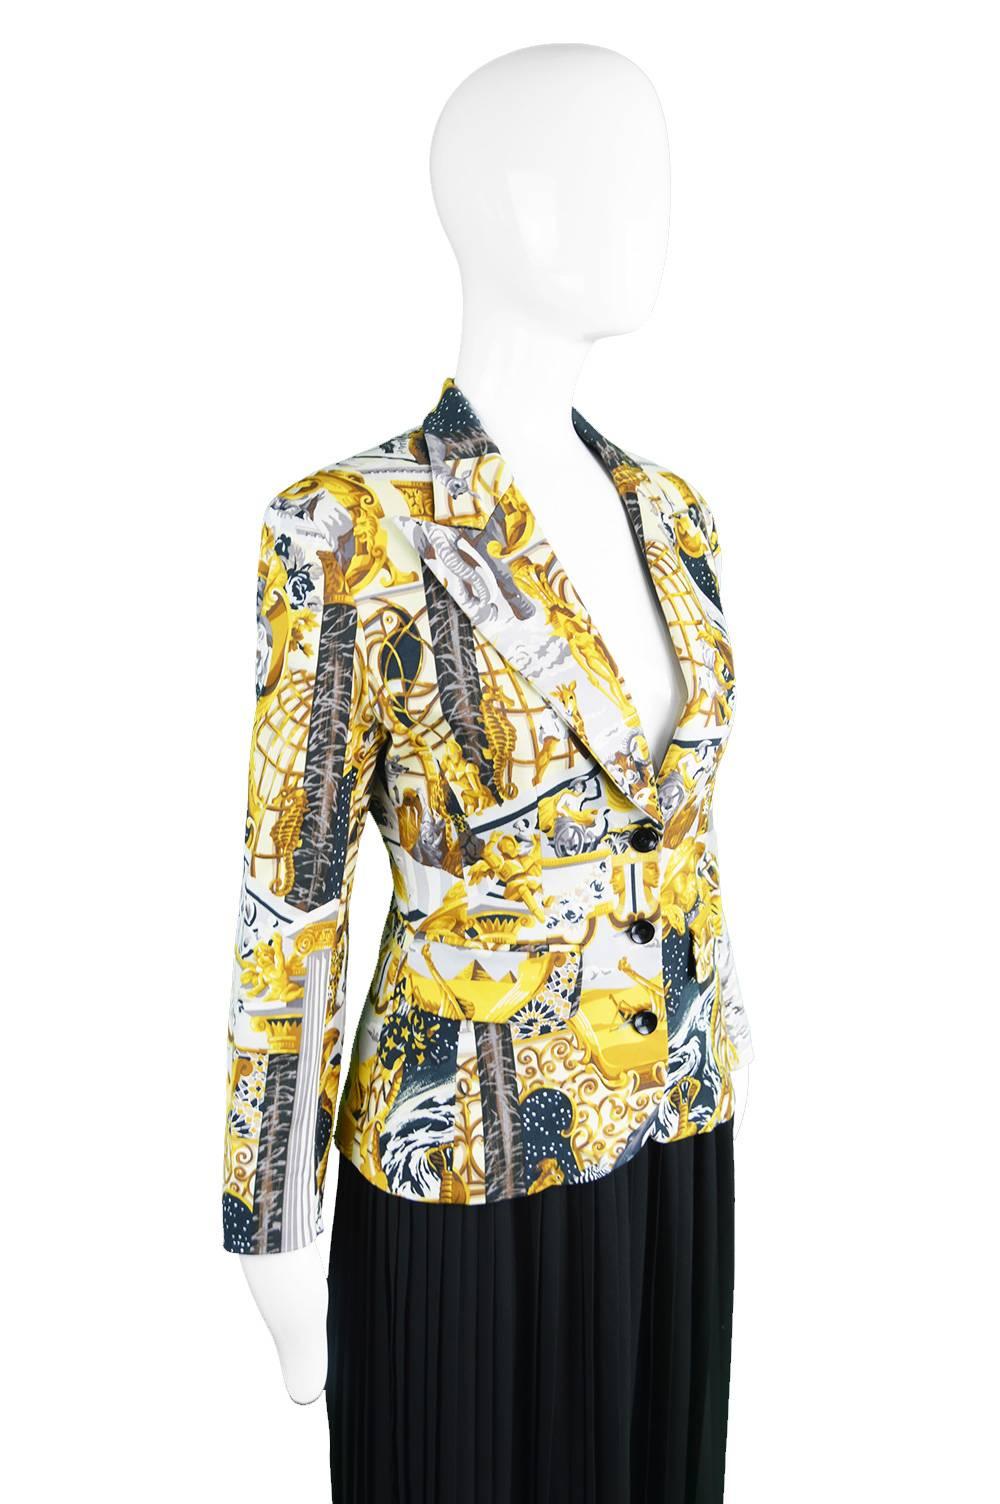 Kenzo Baroque Mythology Print Jacket, 1990s In Excellent Condition For Sale In Doncaster, South Yorkshire